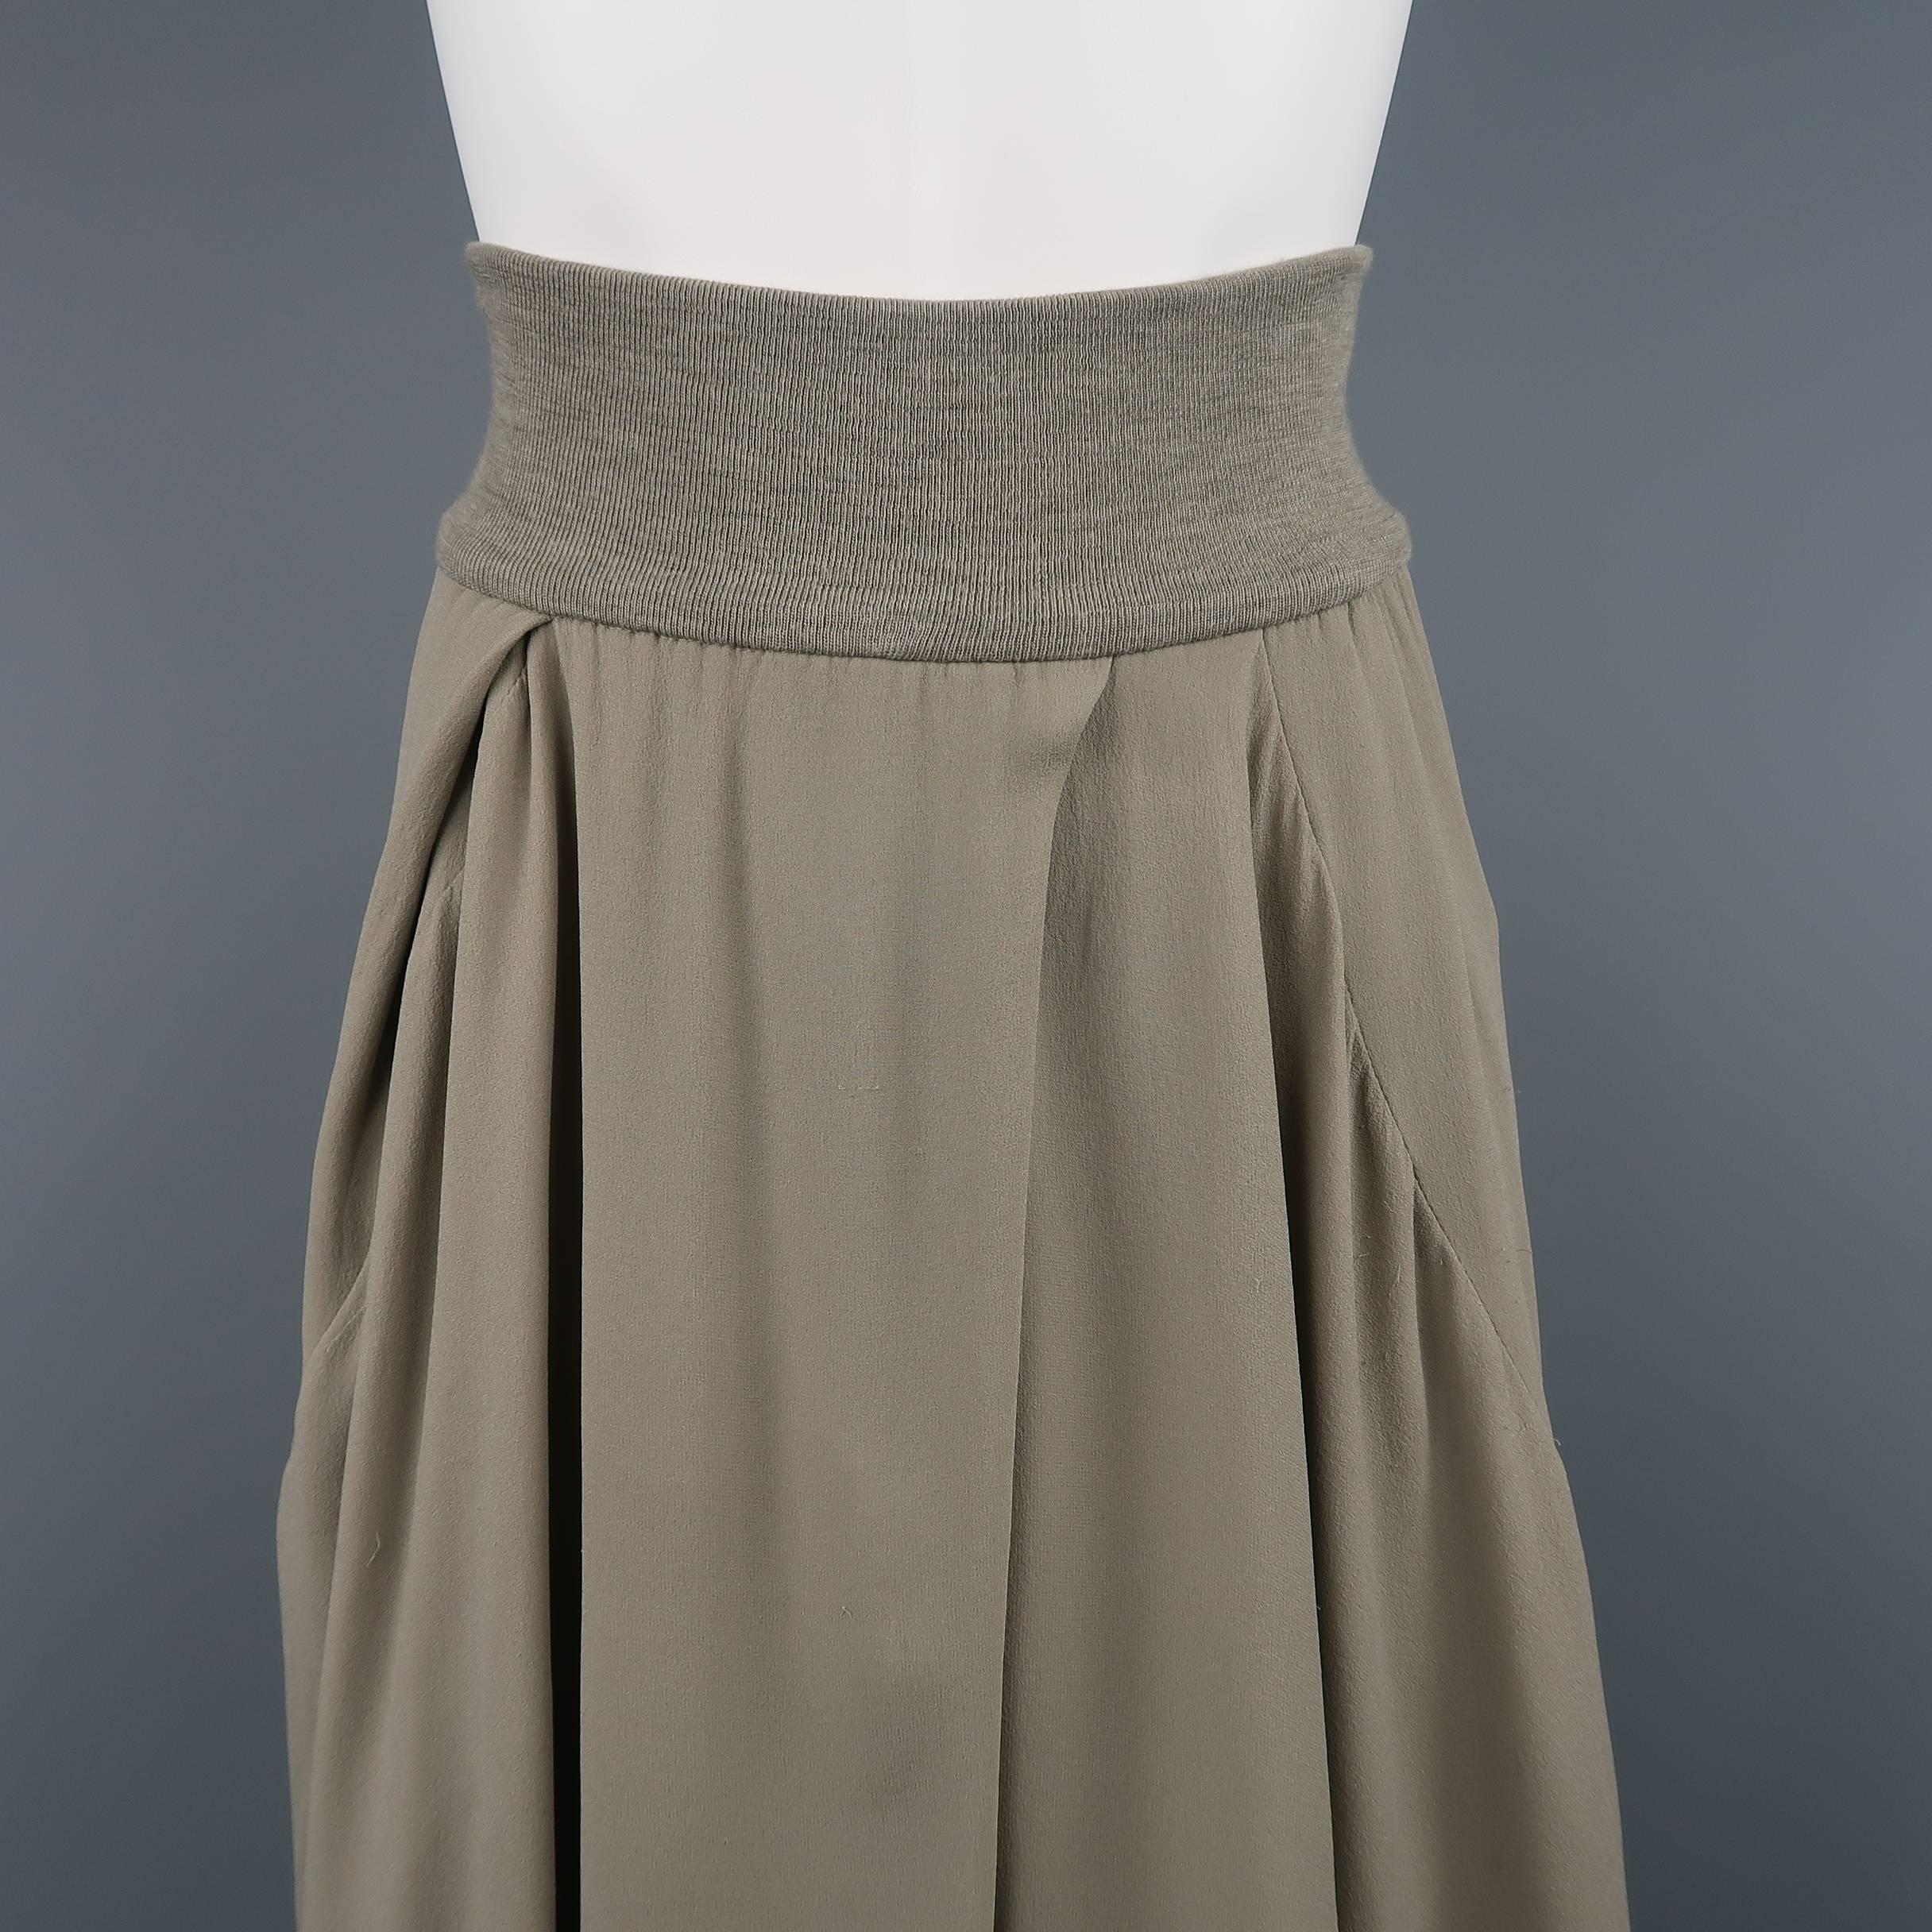 Brunello Cucinelli skirt comes in moss gray silk chiffon with a ribbed knit waistband, layered drape A line silhouette, and high low hem. Wear throughout. As-is. Made in Italy. 
Retails $1995.00
 
Good-Fair Pre-Owned Condition.
Marked: 2
